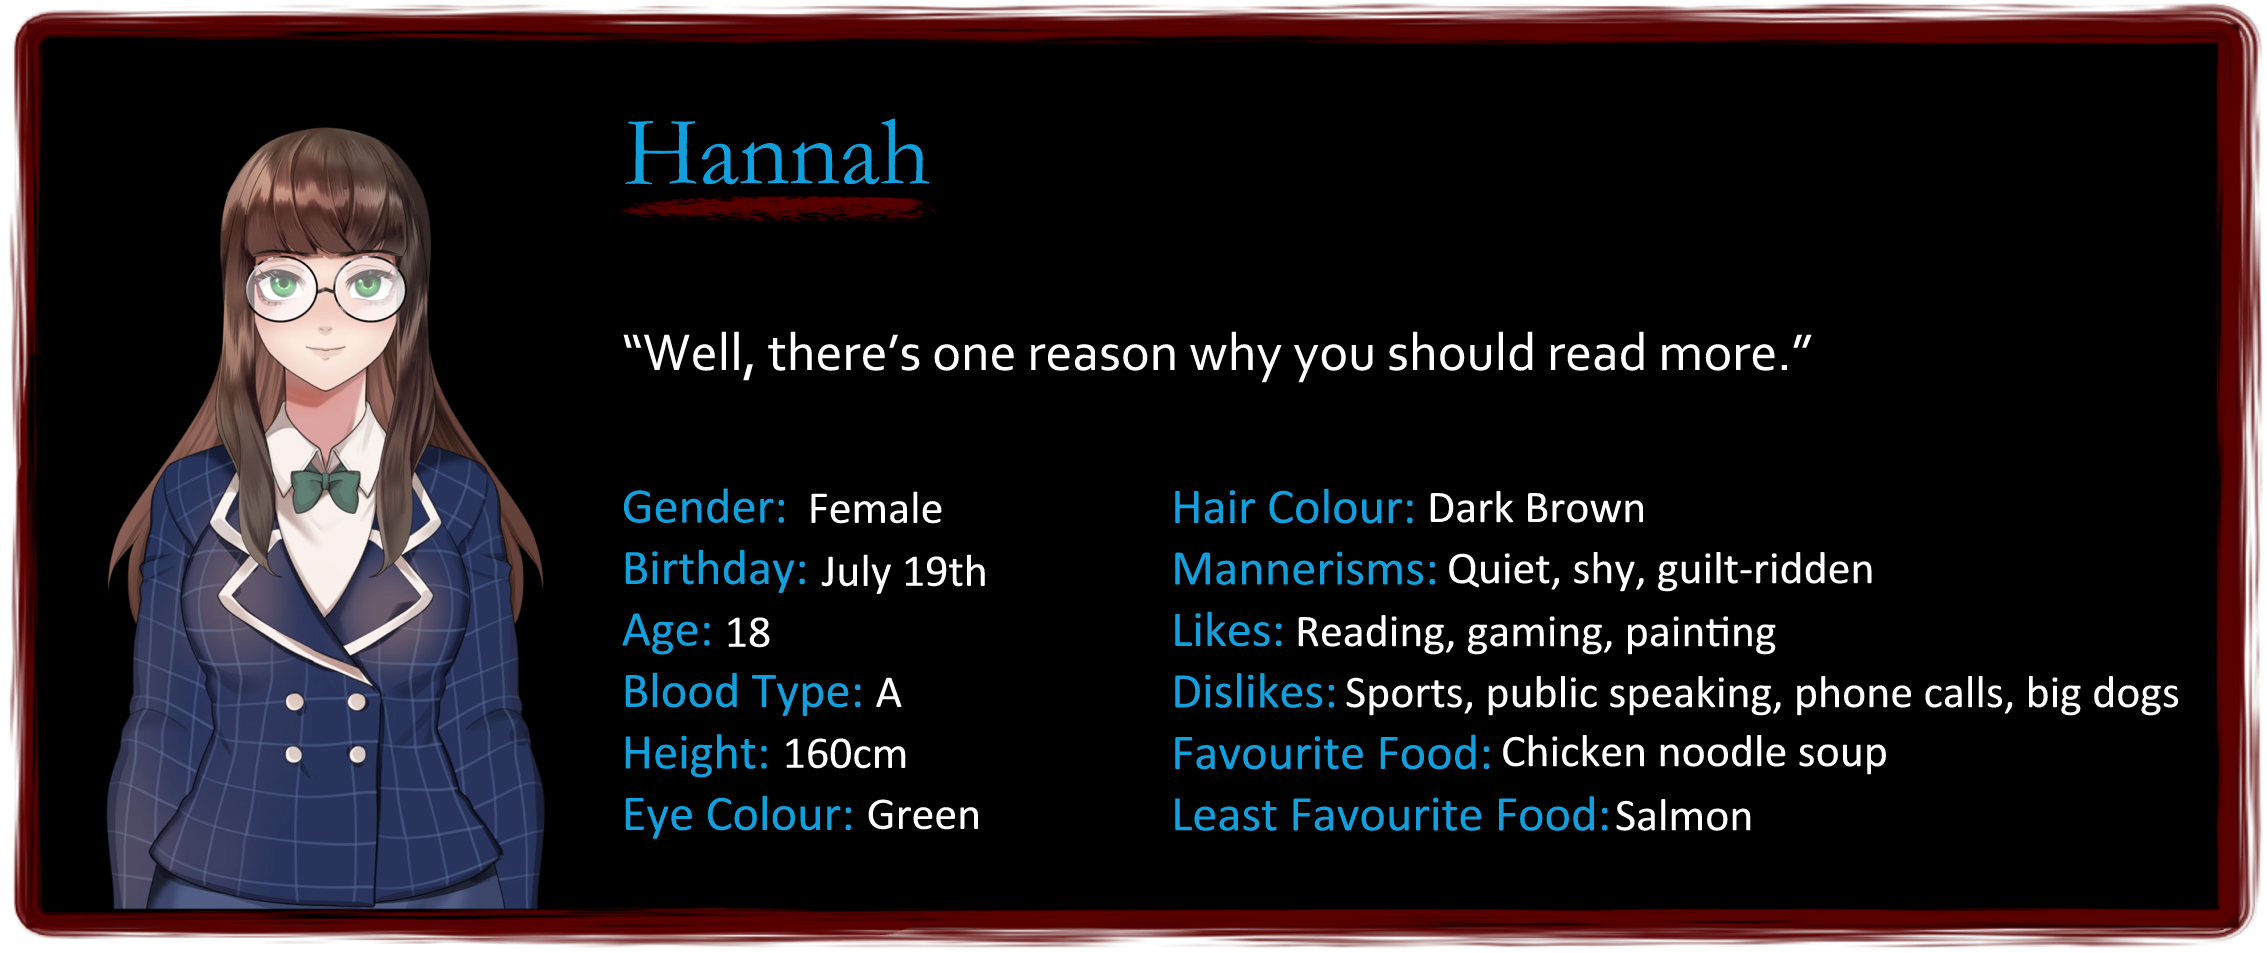 A profile card containing information about Hannah, one of the characters in The Many Deaths of Lily Kosen